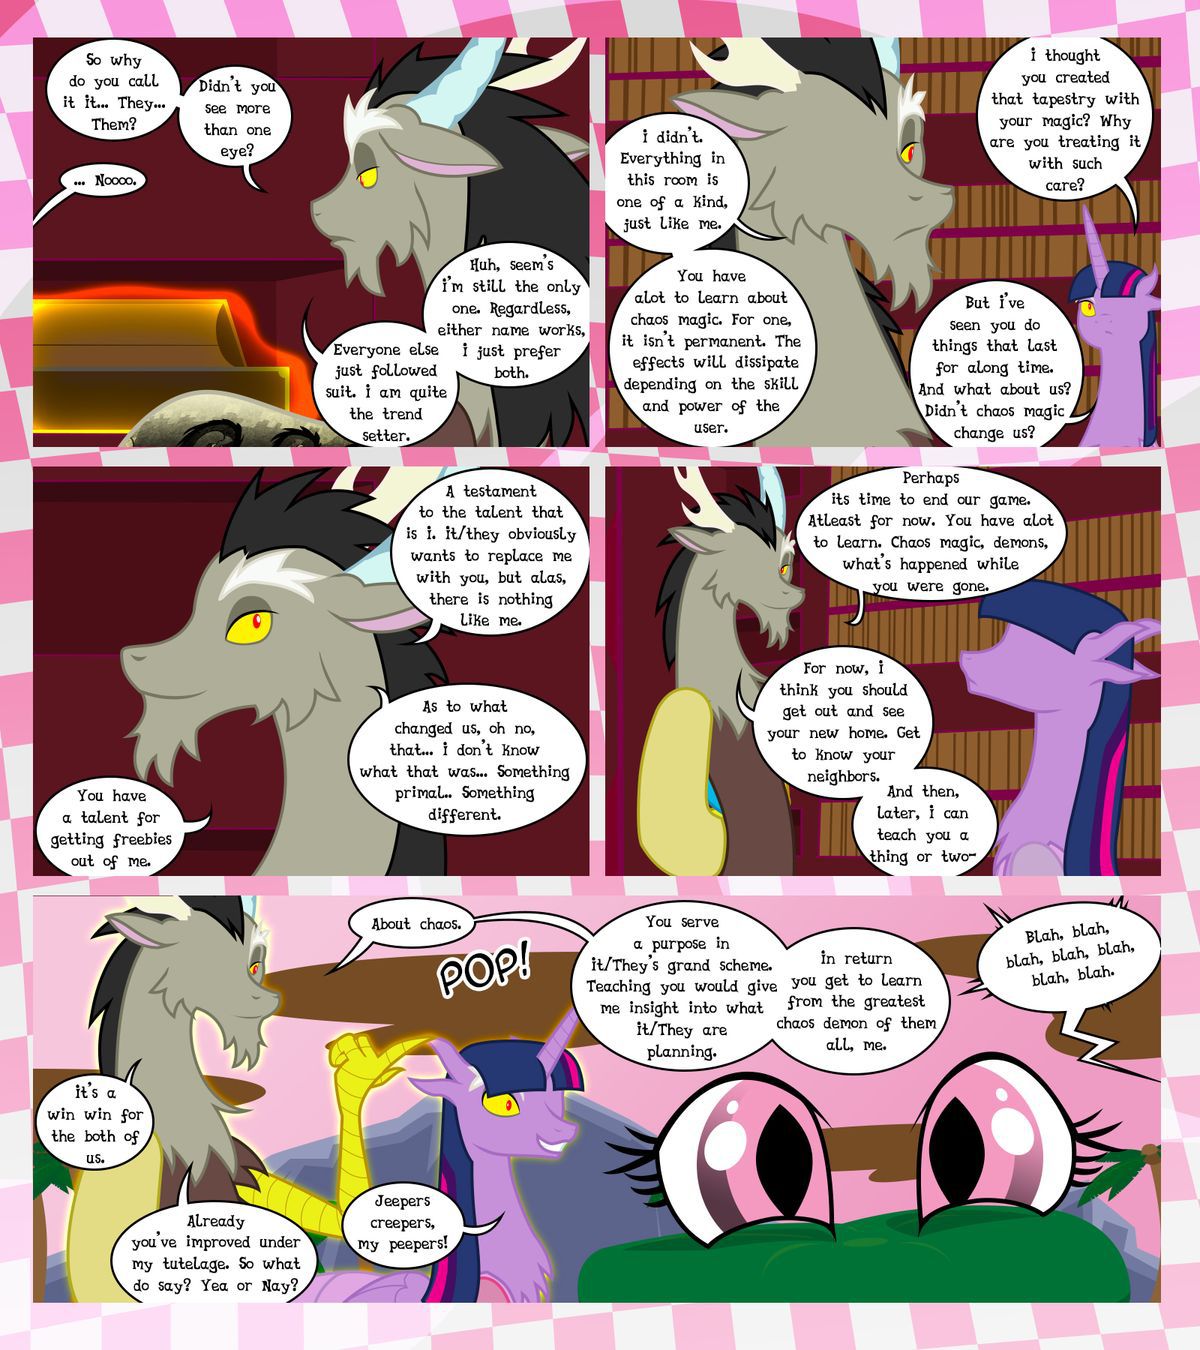 [GatesMcCloud] Cutie Mark Crusaders 10k: Chapter 3 - The Lost (My Little Pony: Friendship is Magic) [English] [Ongoing] 32